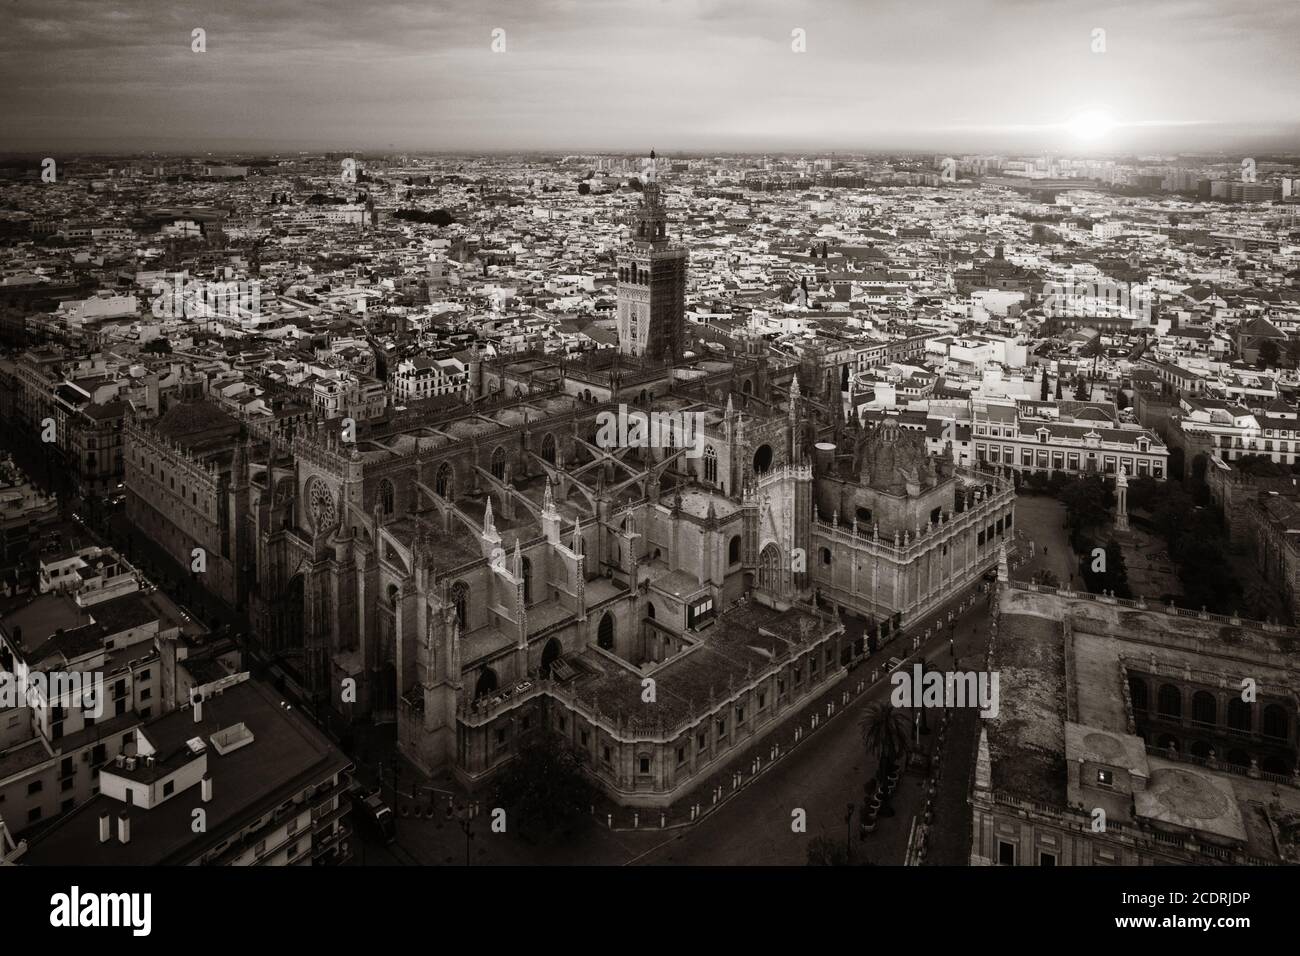 The Cathedral of Saint Mary of the See or Seville Cathedral aerial view as the famous landmark in Seville, Spain. Stock Photo